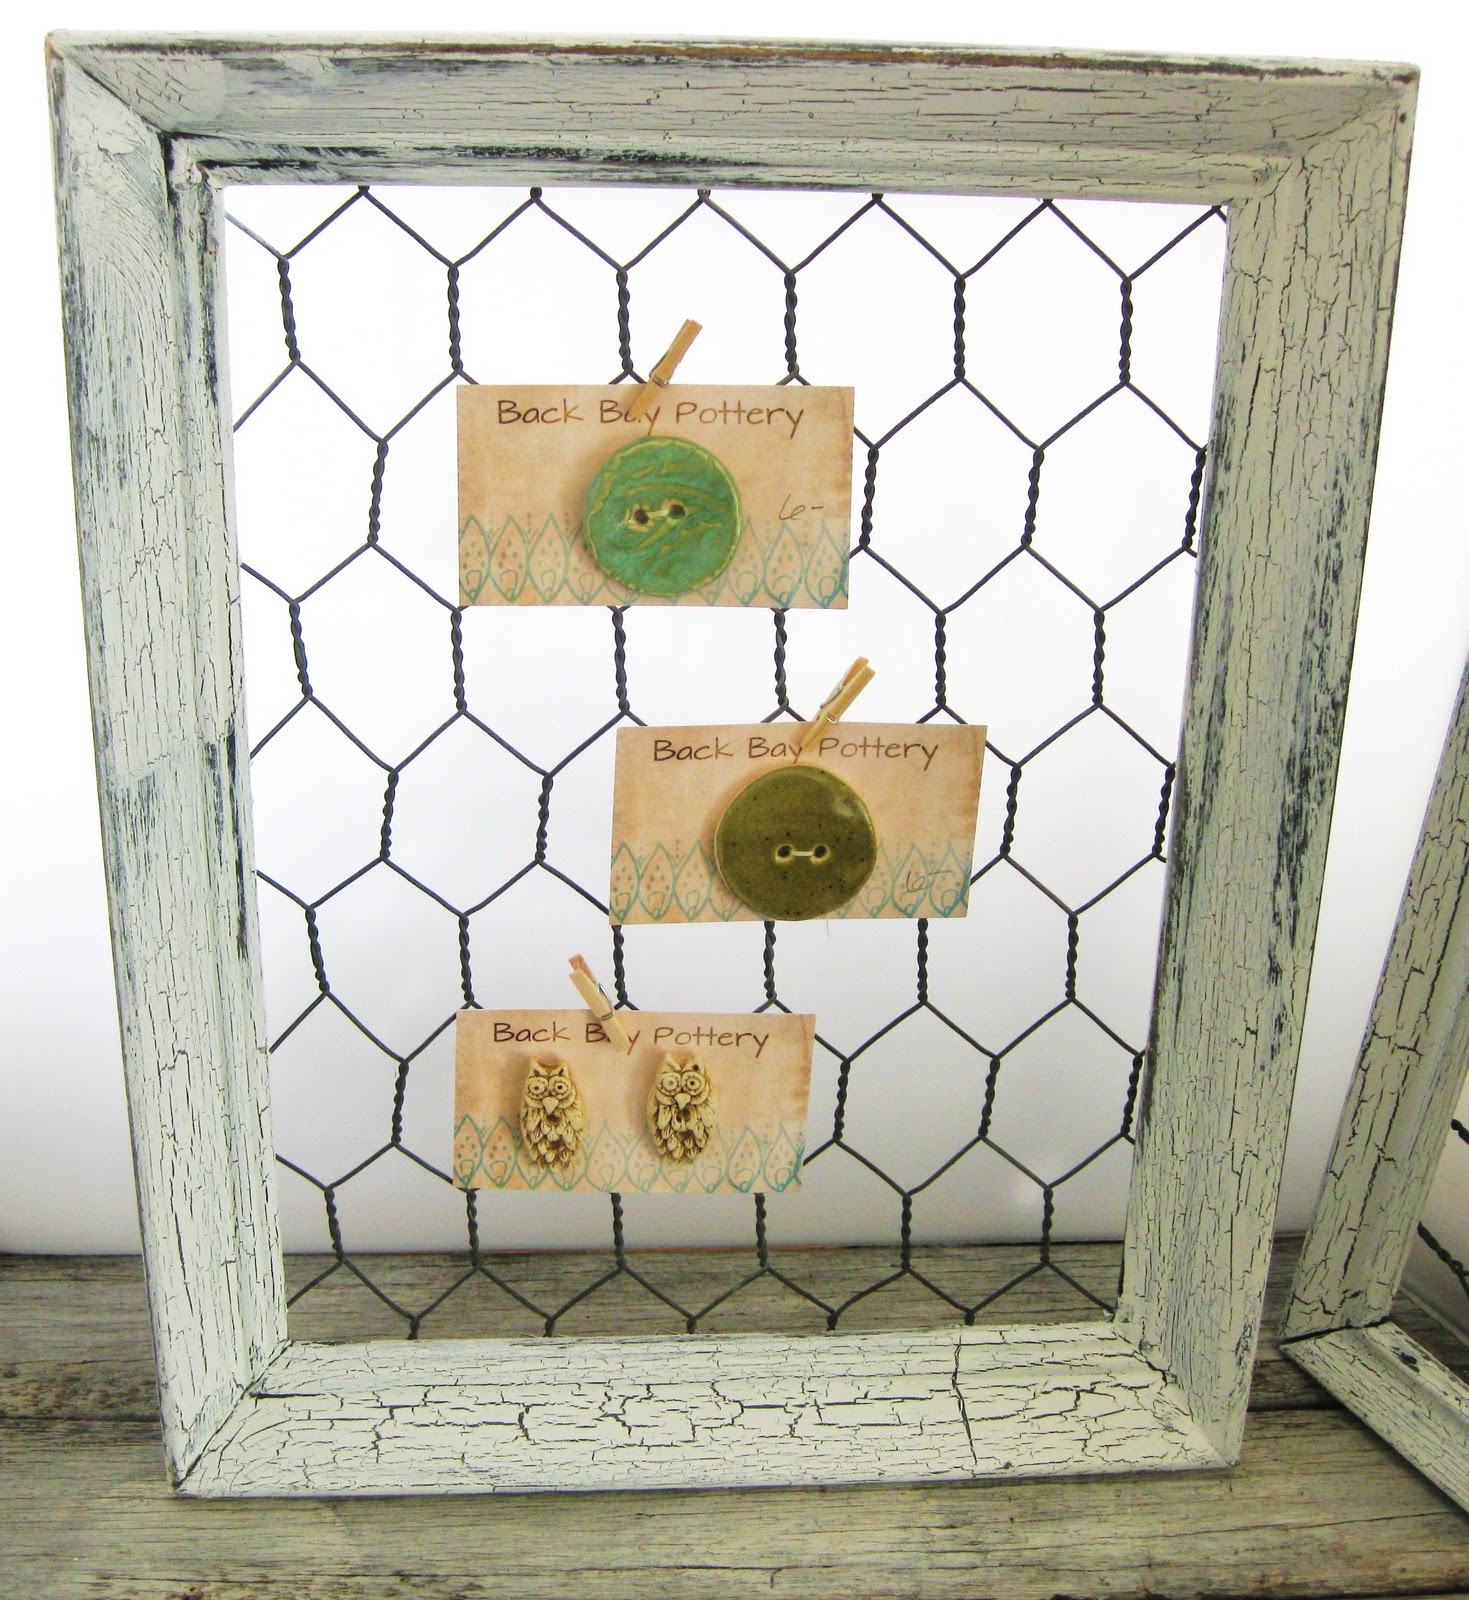 Back Bay Pottery: Make a Shabby Chic Chicken Wire Frame